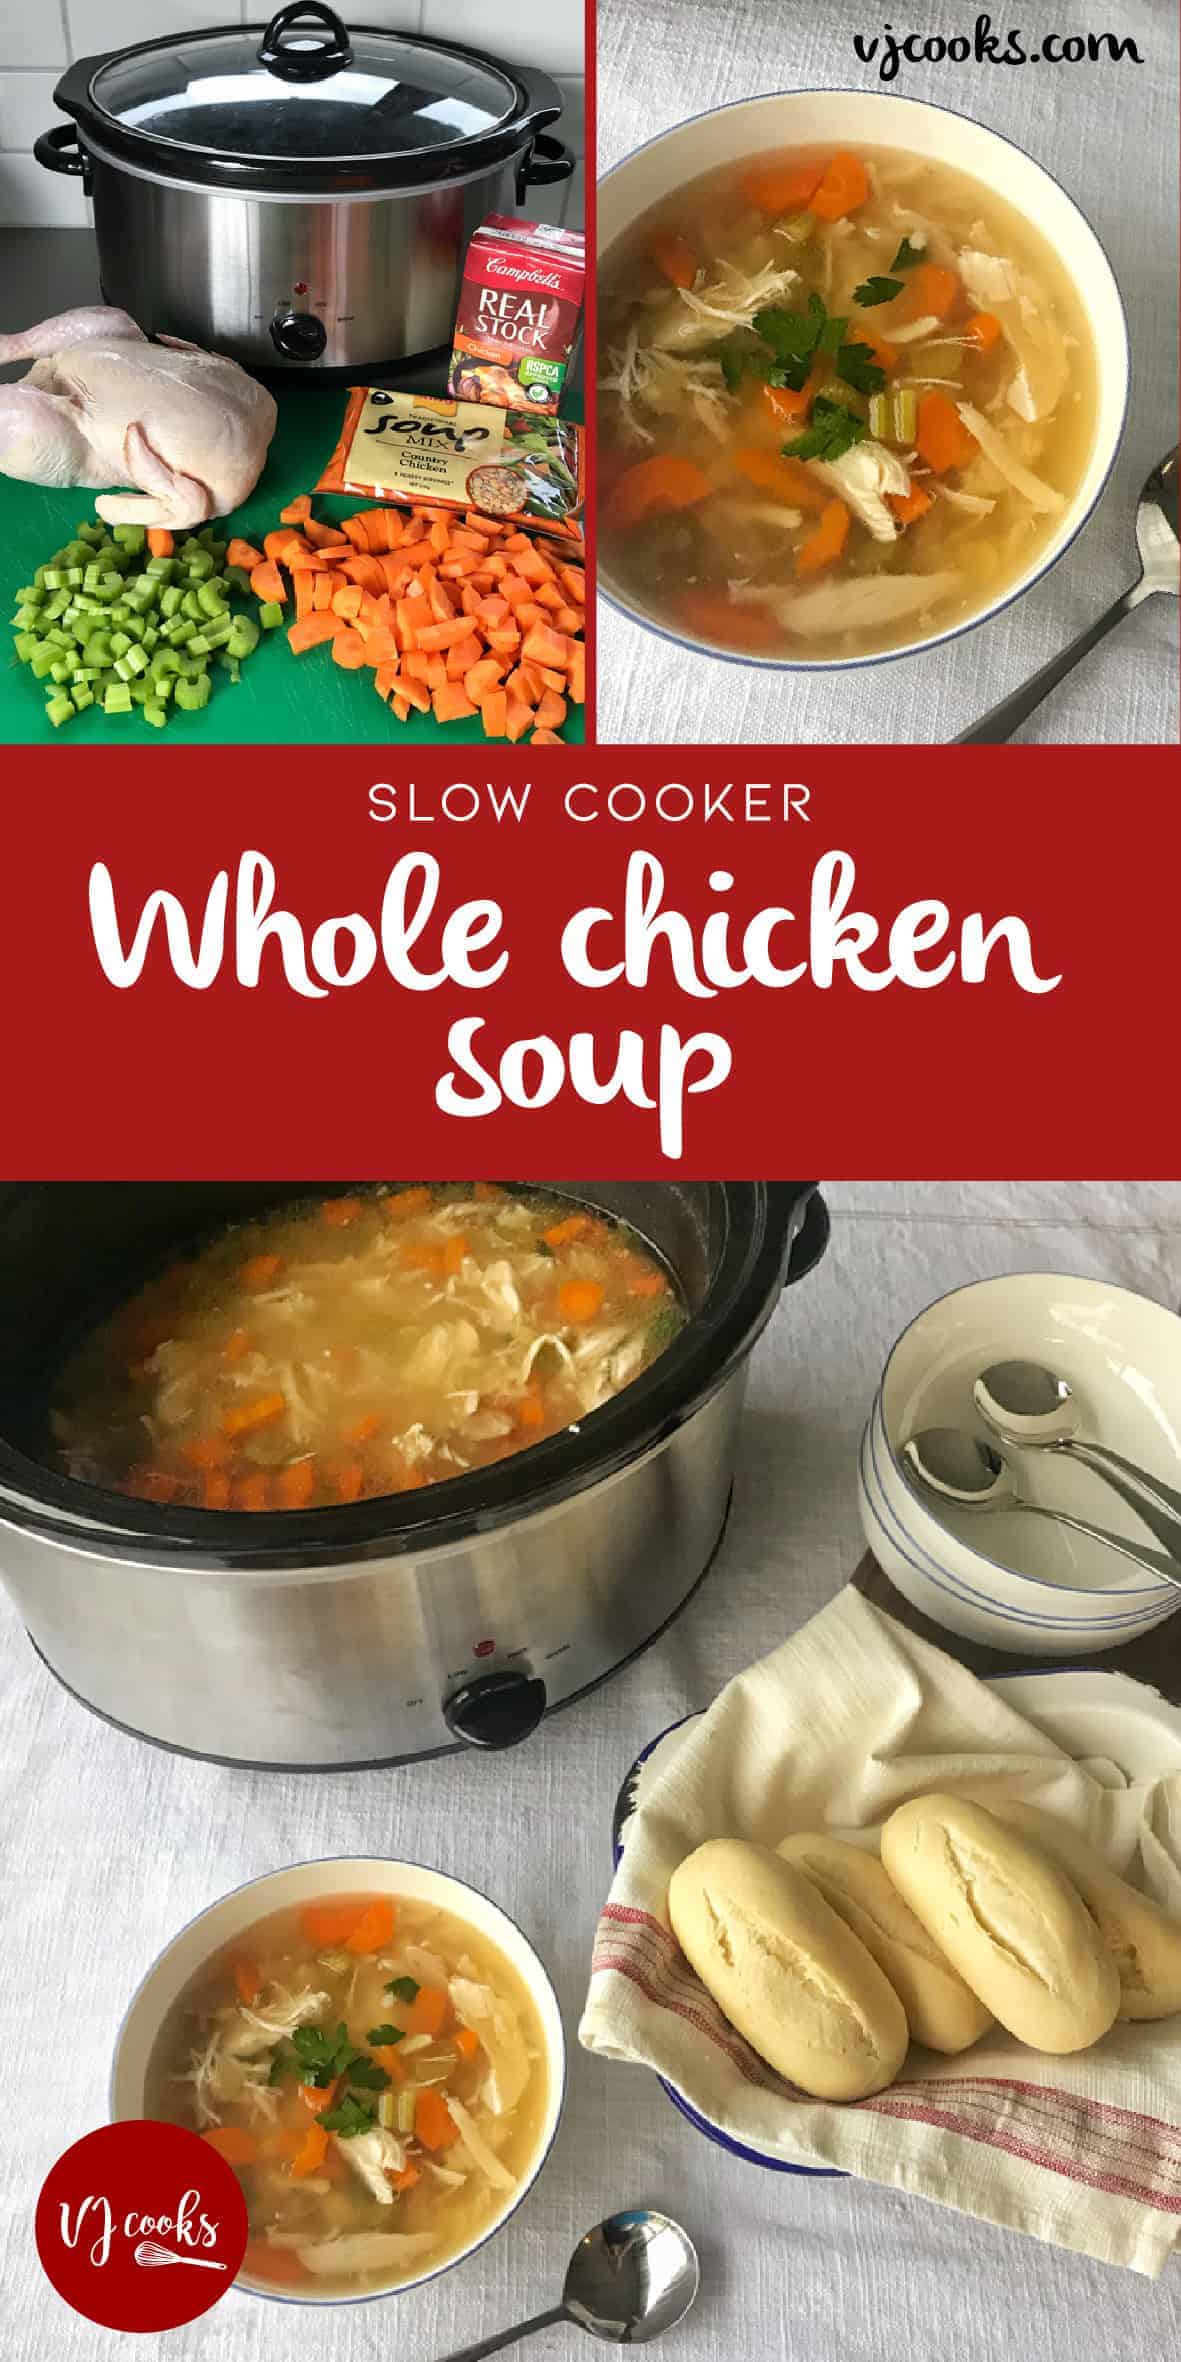 Whole chicken soup cooked in the slow cooker.